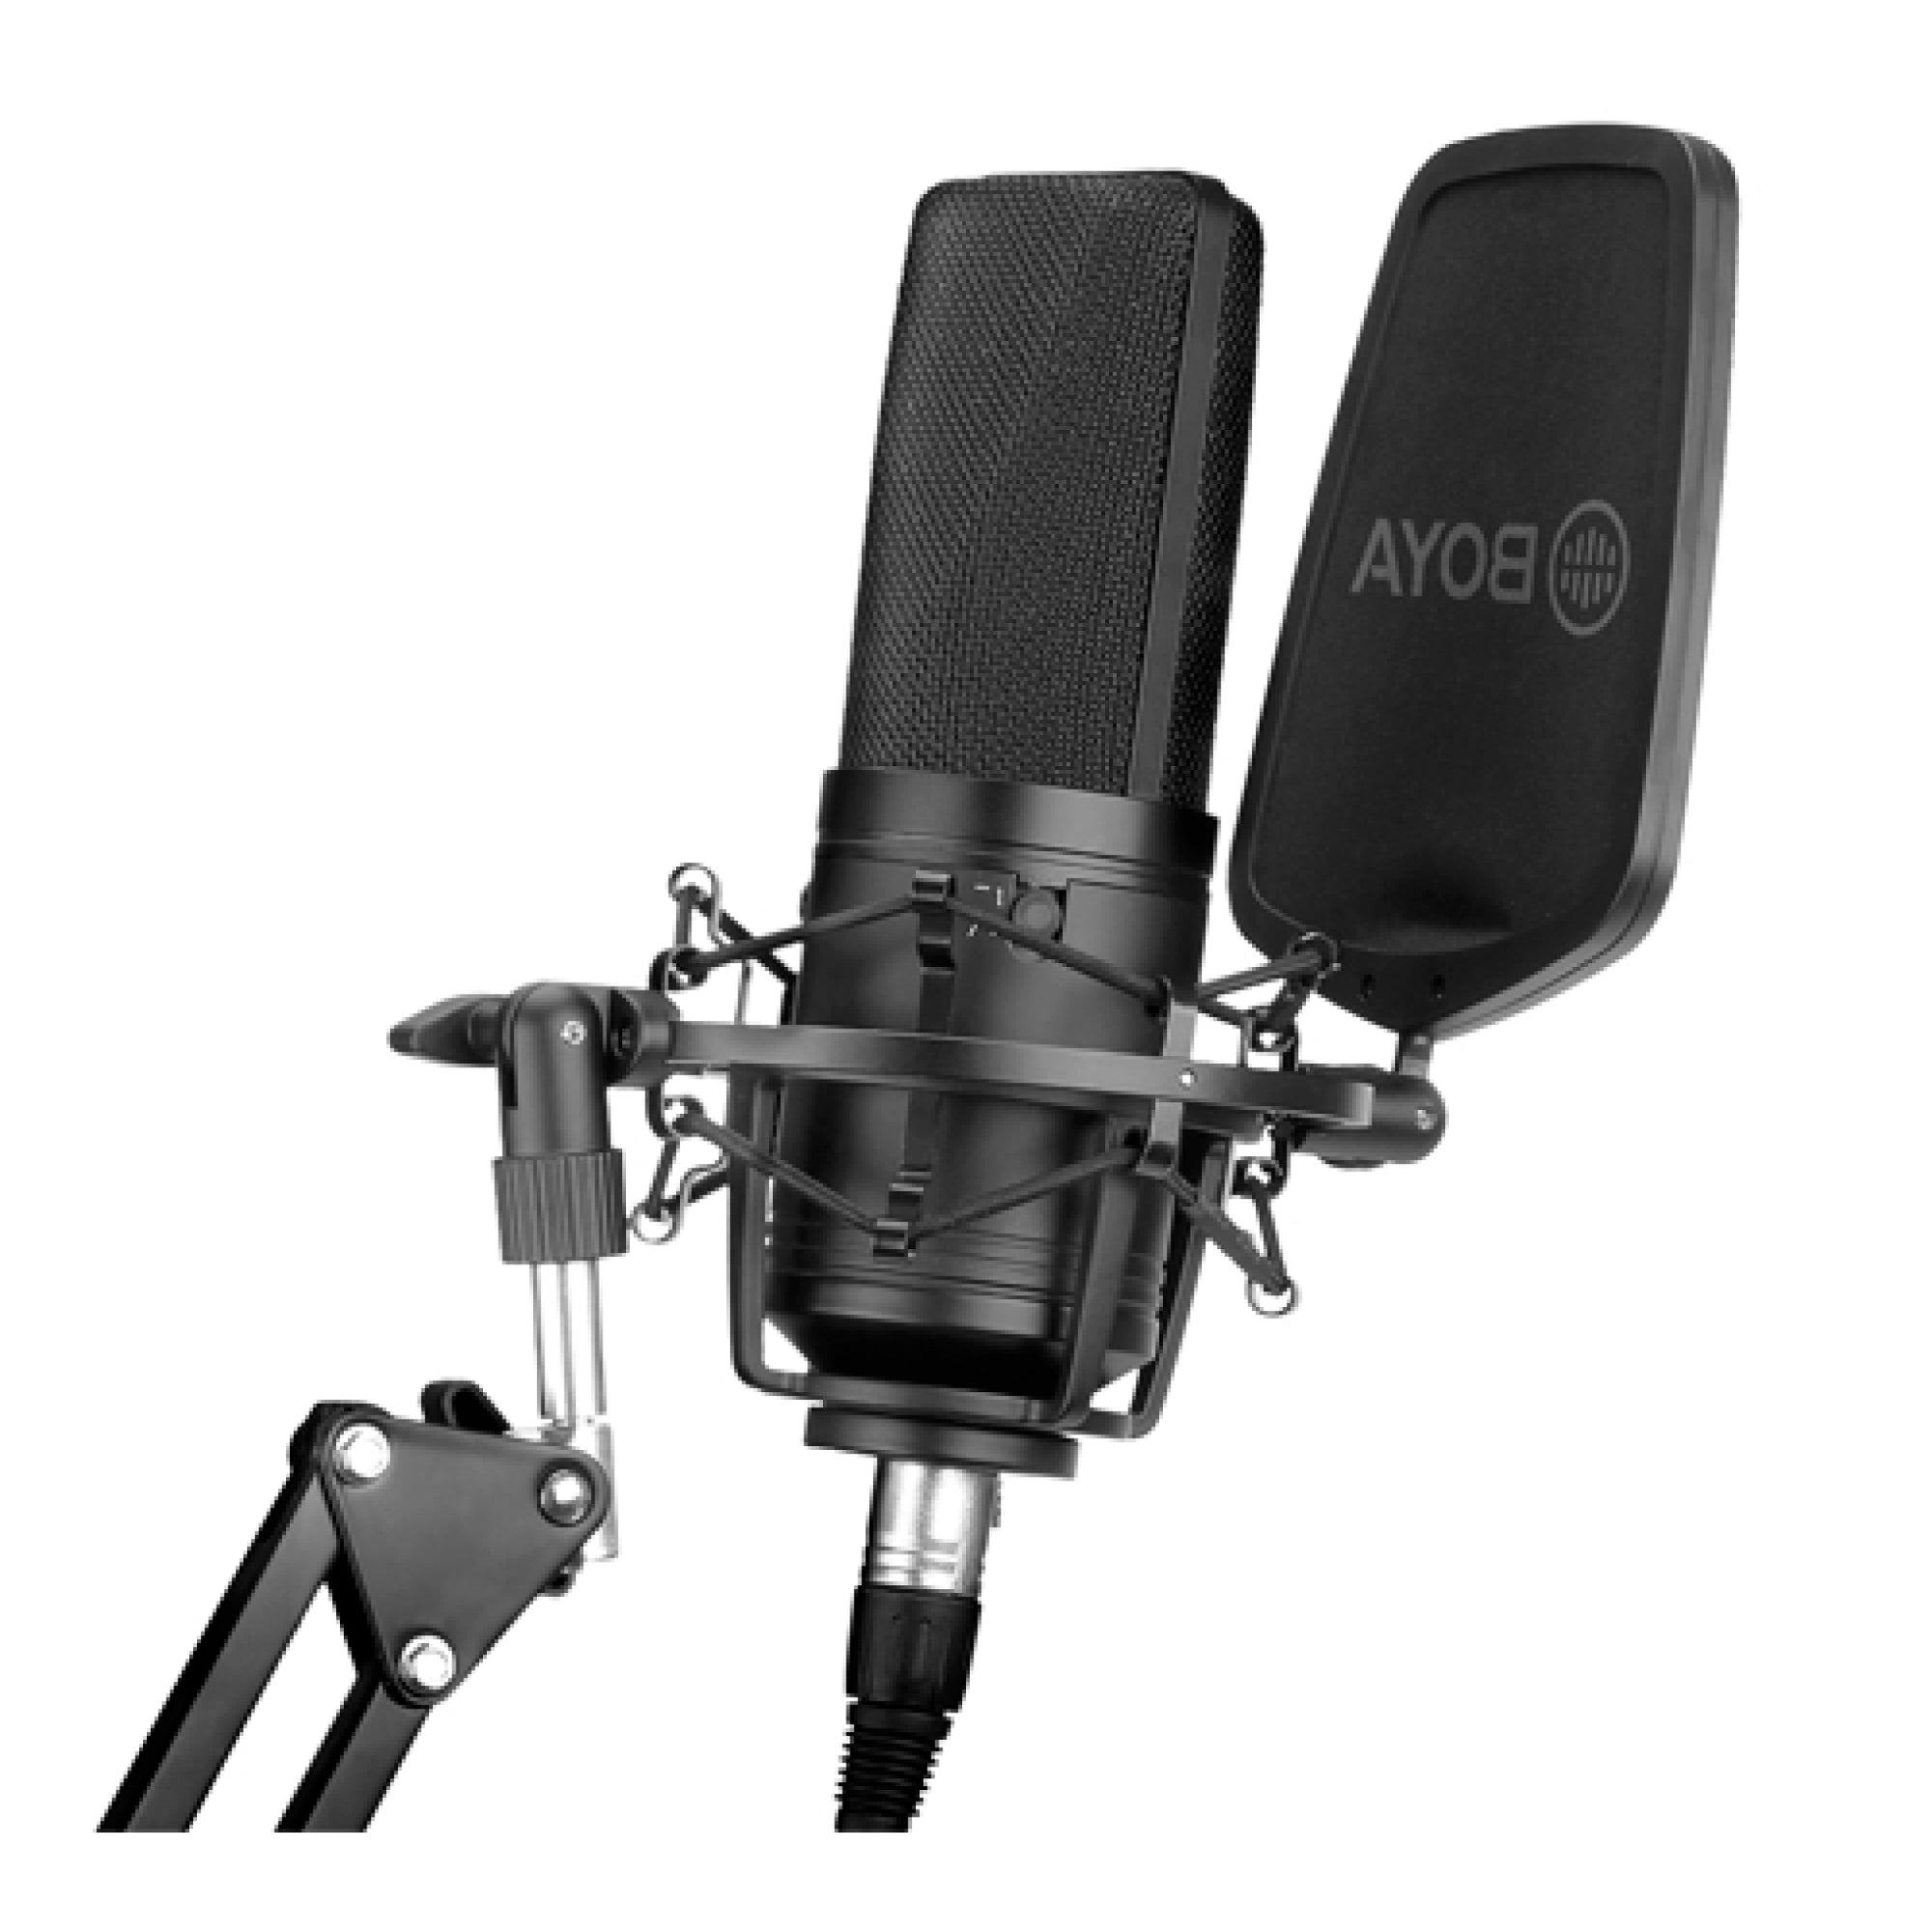 BOYA BY-M1000 Condenser Microphone - Gears For Ears